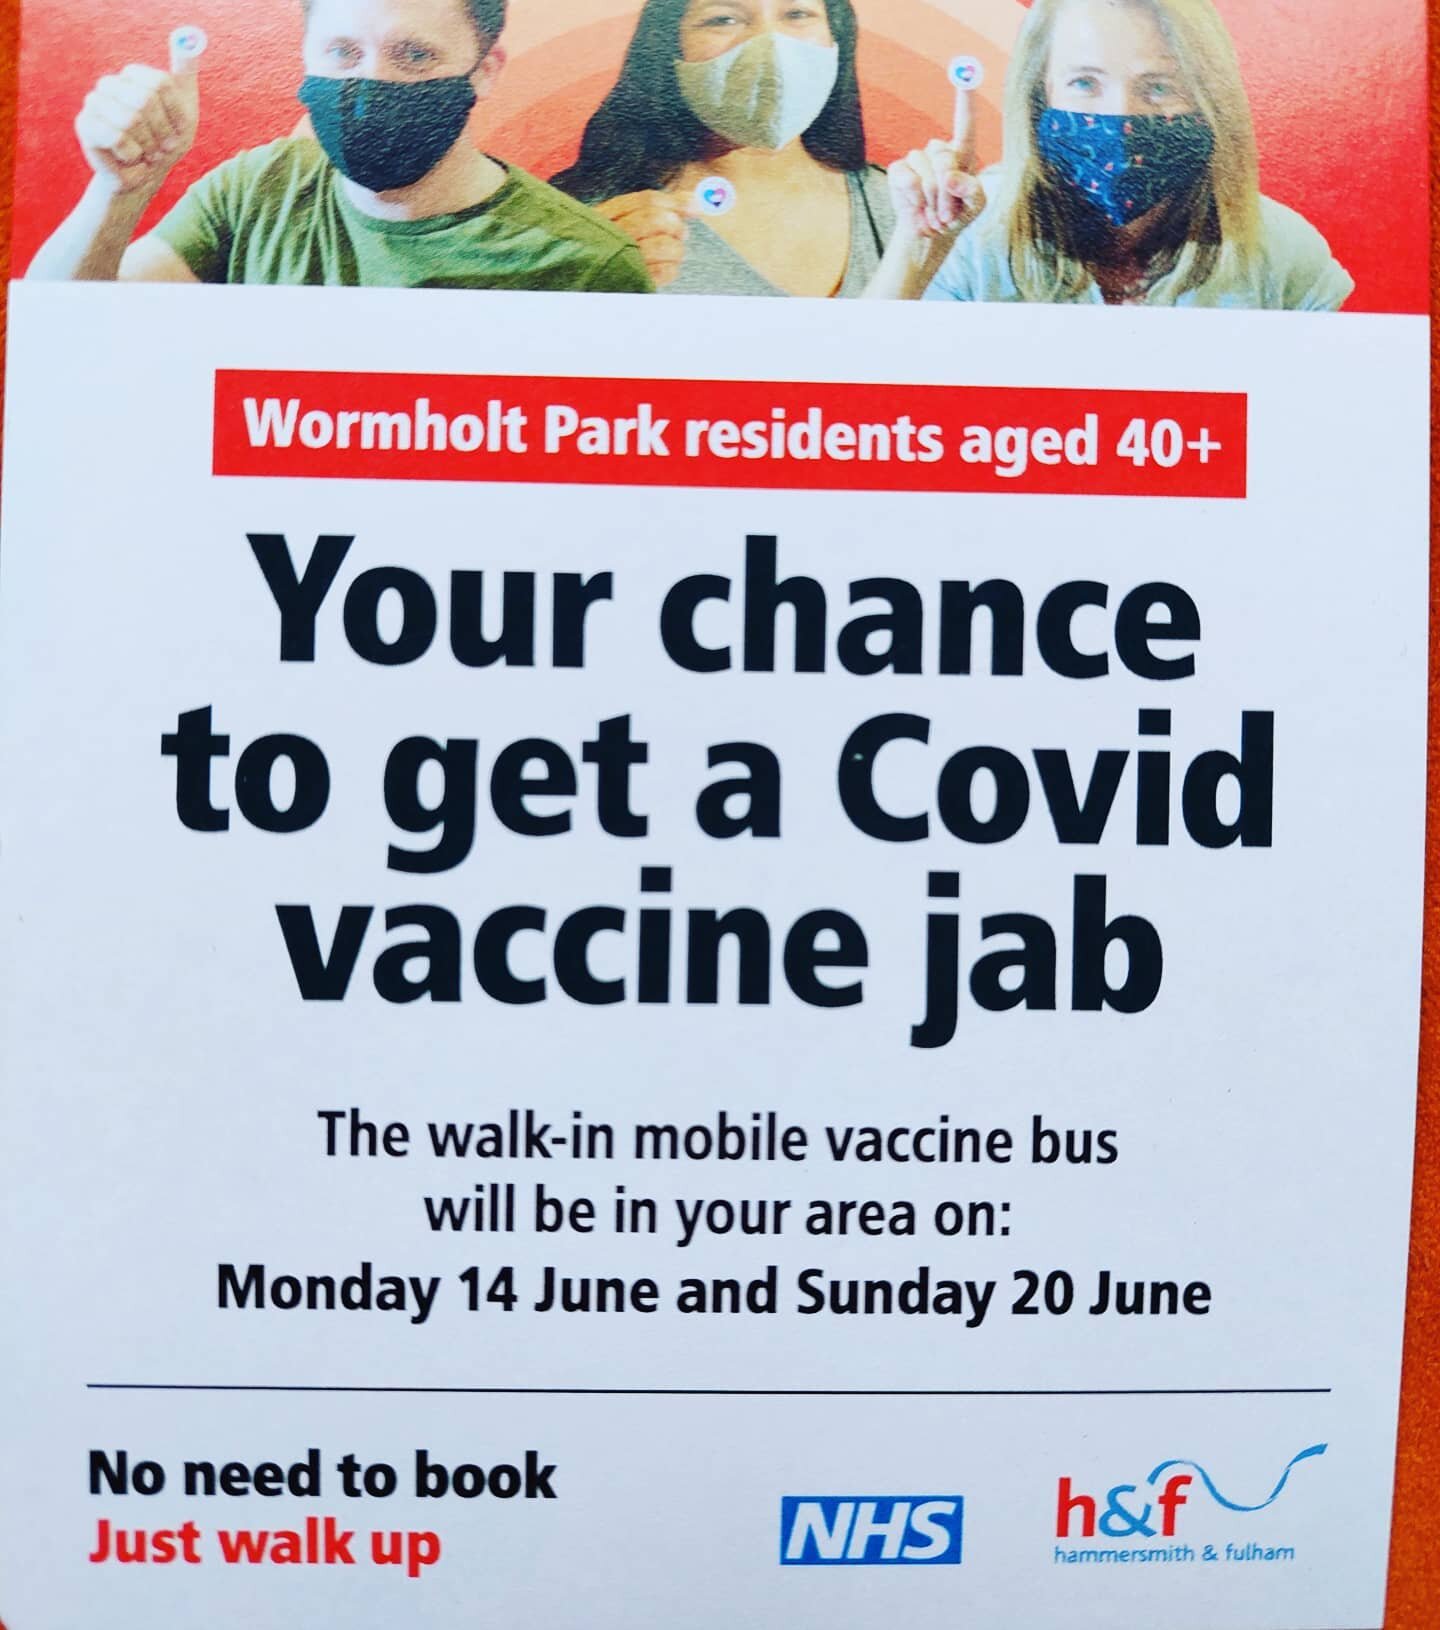 Mobilevaccine bus willbe in Wormholt Park this Sunday
#nhs #stopcovid #w12 #whitecity #wormholtpark